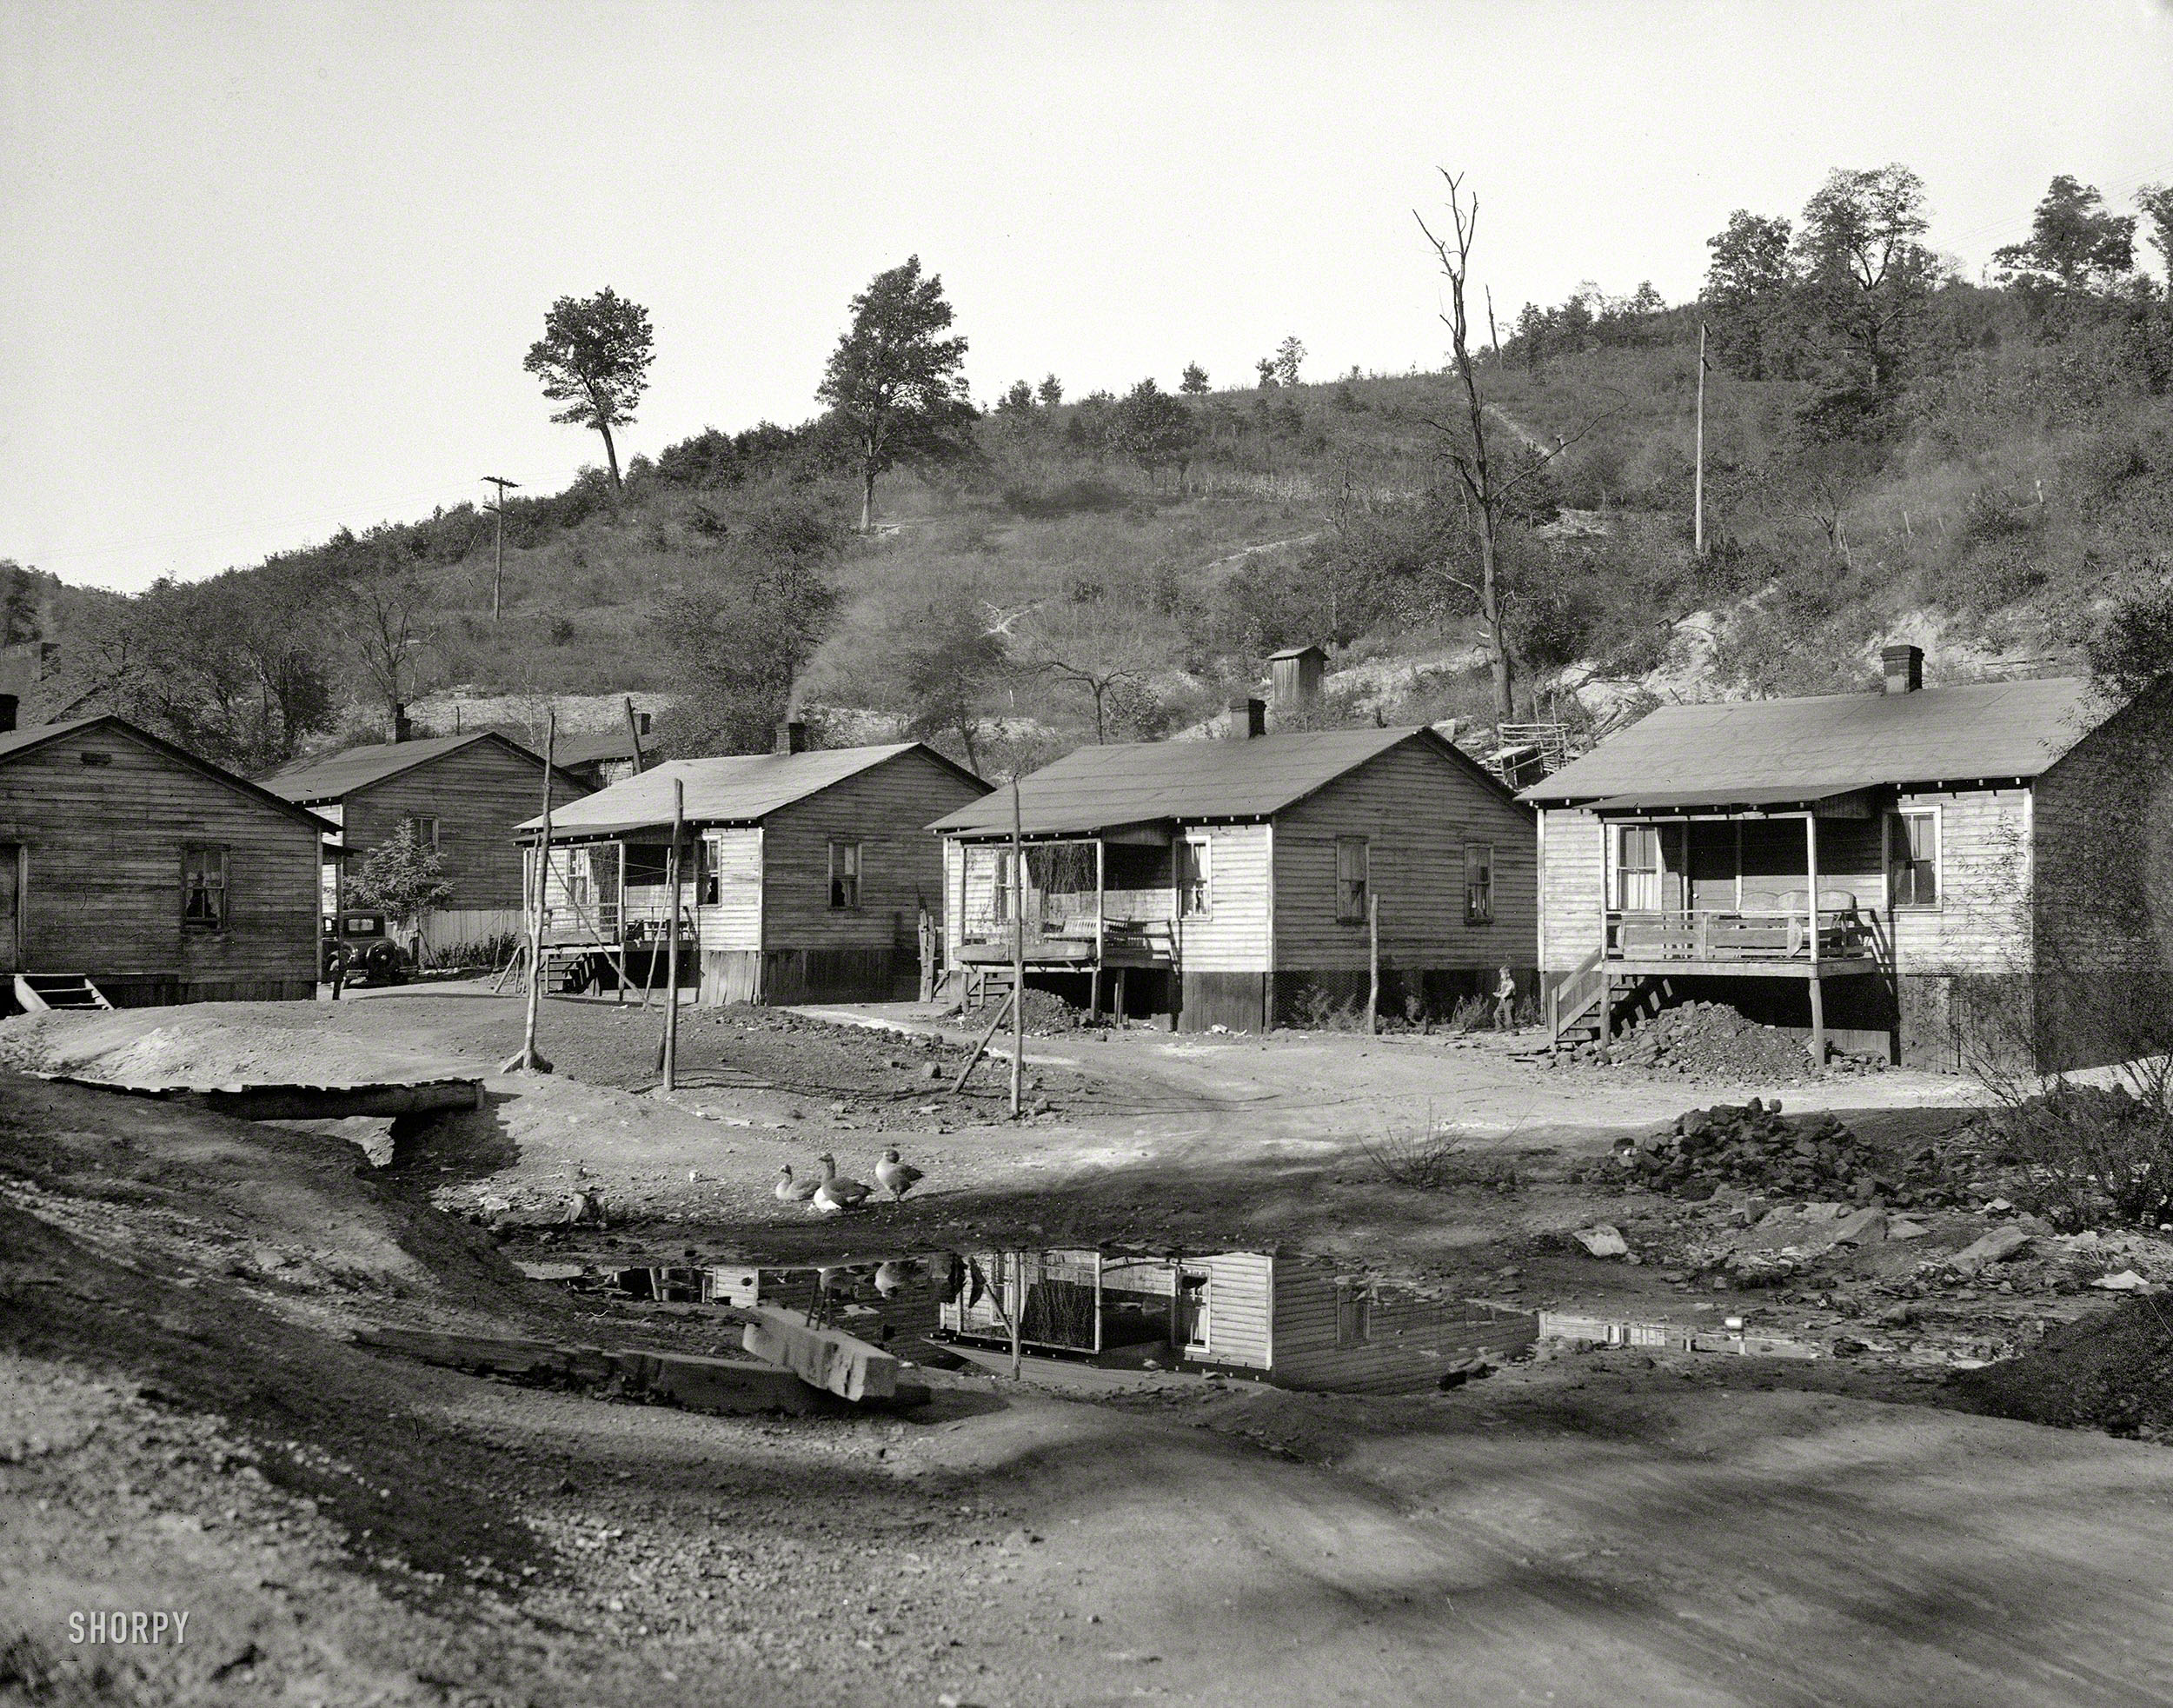 1935. "Miner's house at Scott's Run, West Virginia. Note sewerage system." Photo by Elmer Johnson for the Resettlement Administration. View full size.